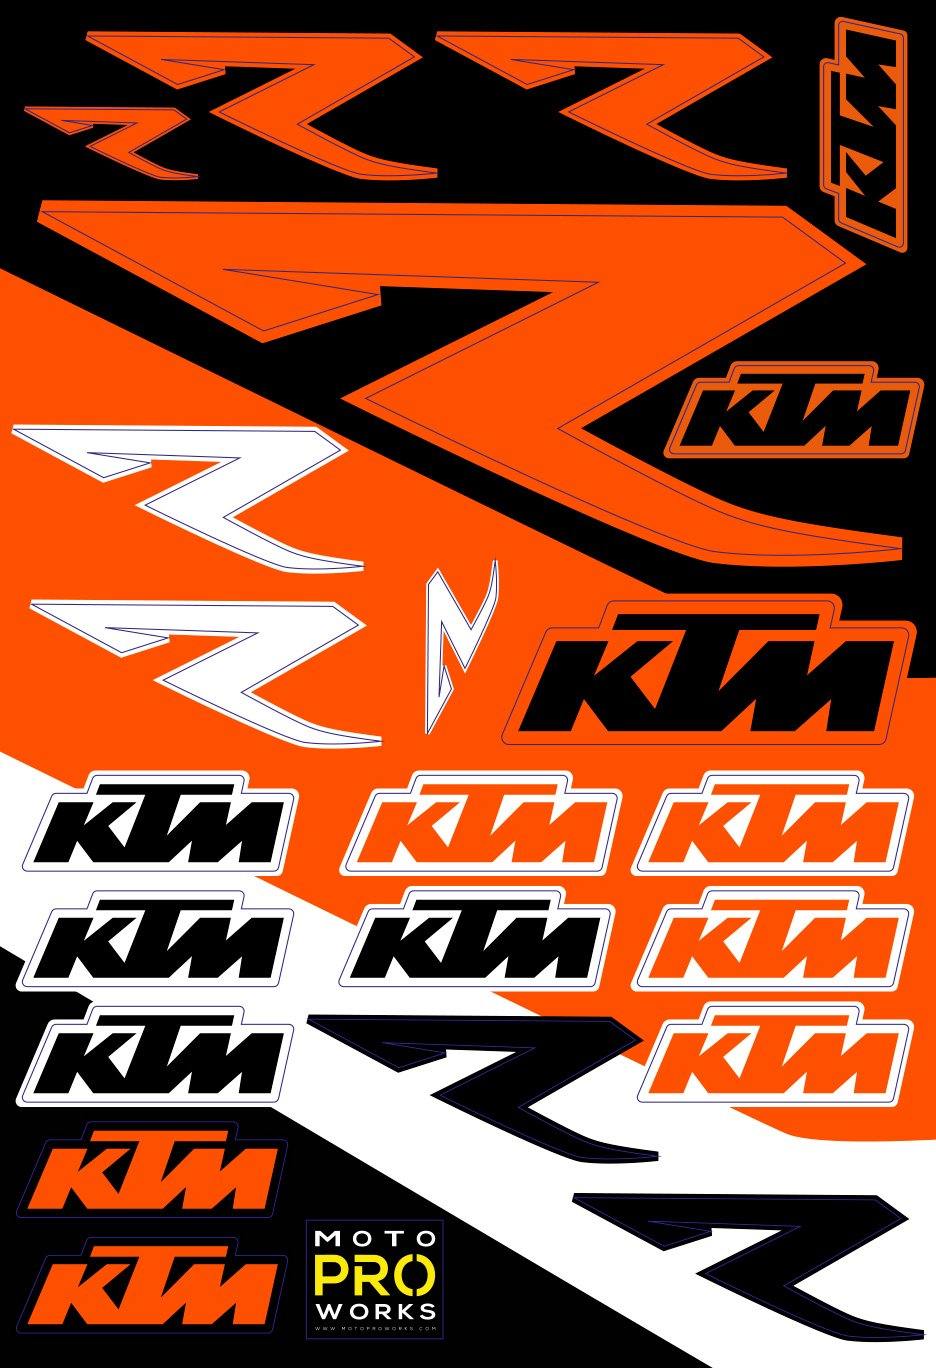 KTM Sticker Sheets - "R" - MotoProWorks | Decals and Bike Graphic kit